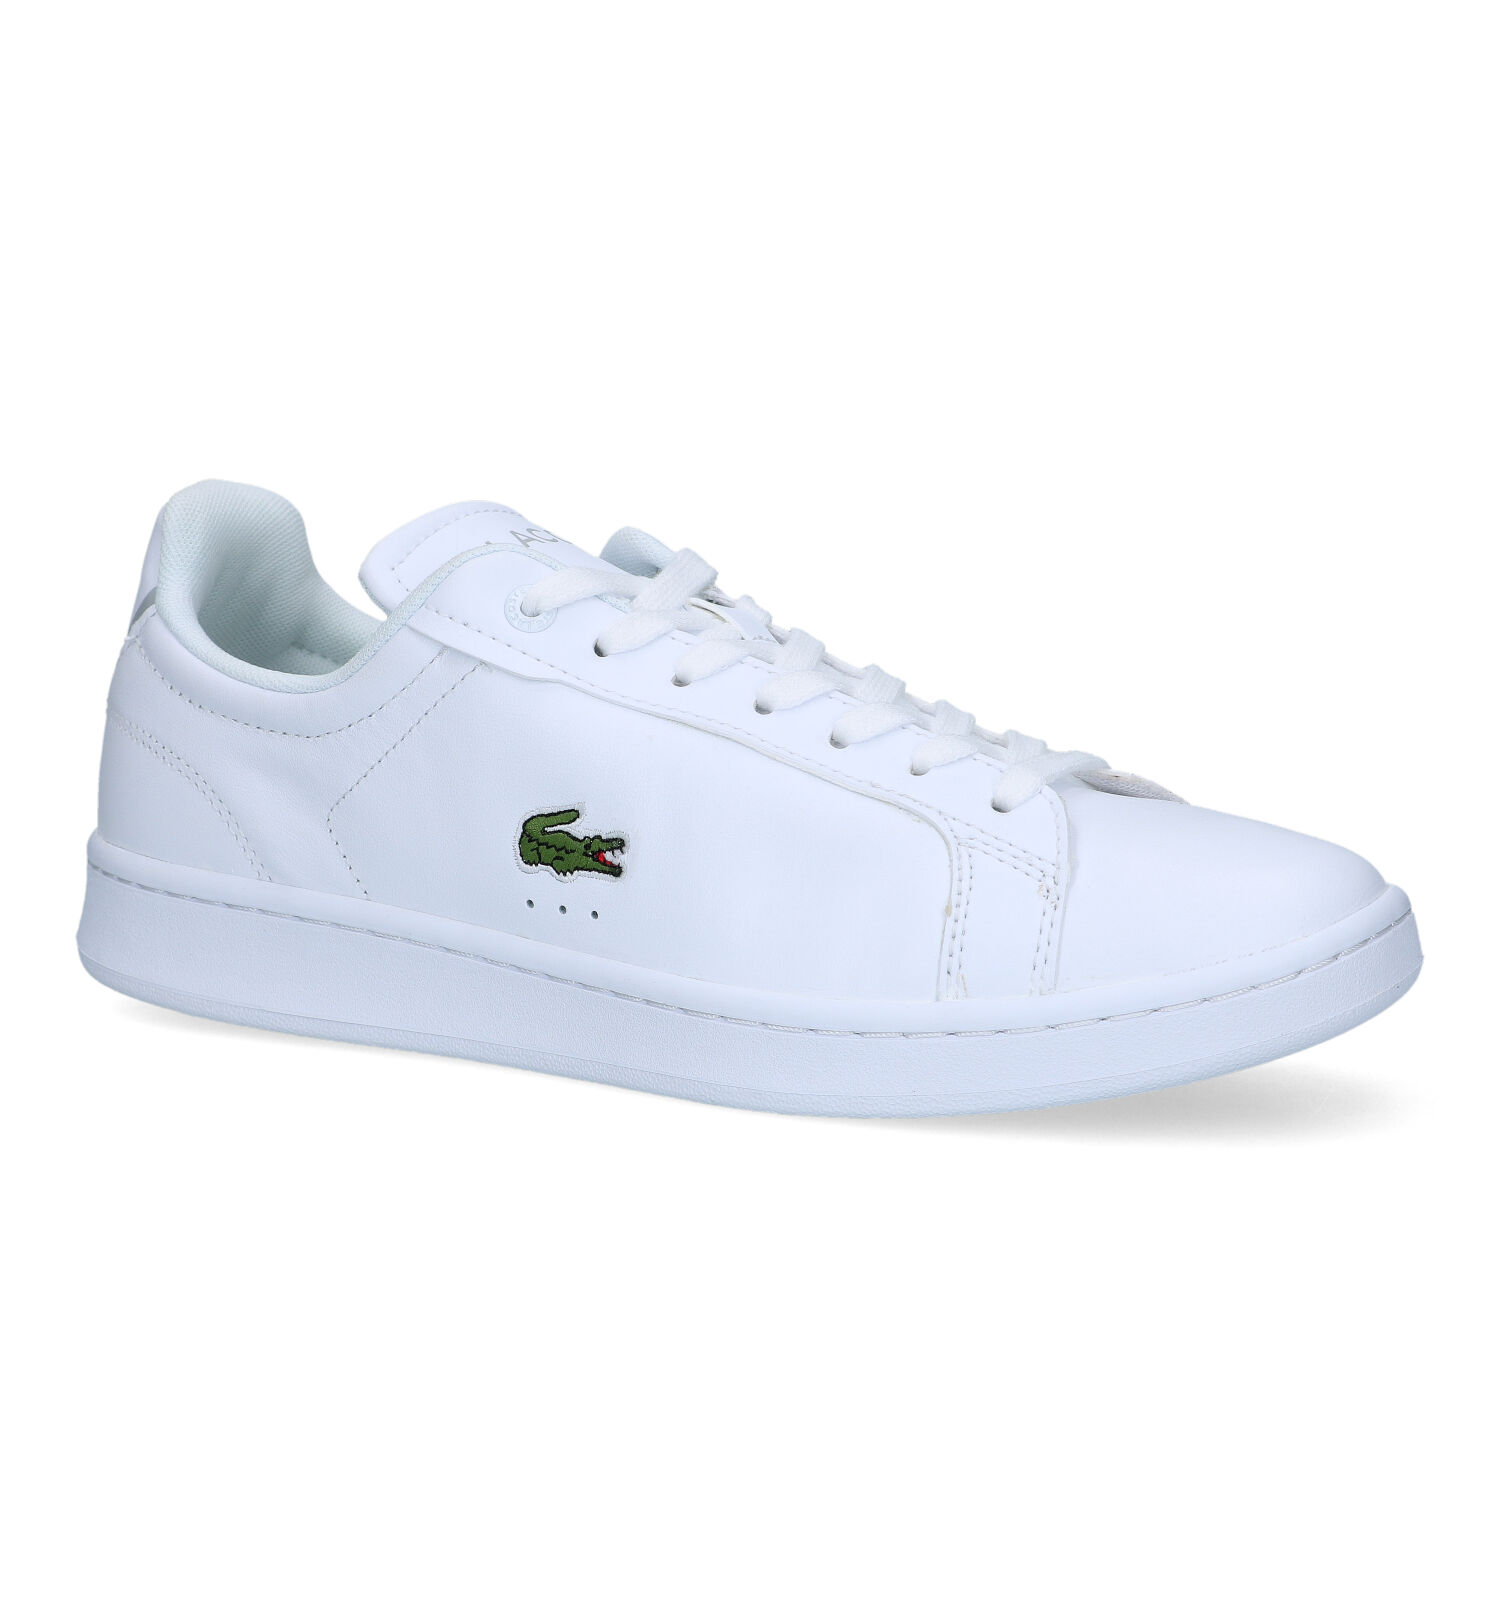 Lacoste Carnaby Pro BL Baskets en Blanc, Hommes Chaussures plates